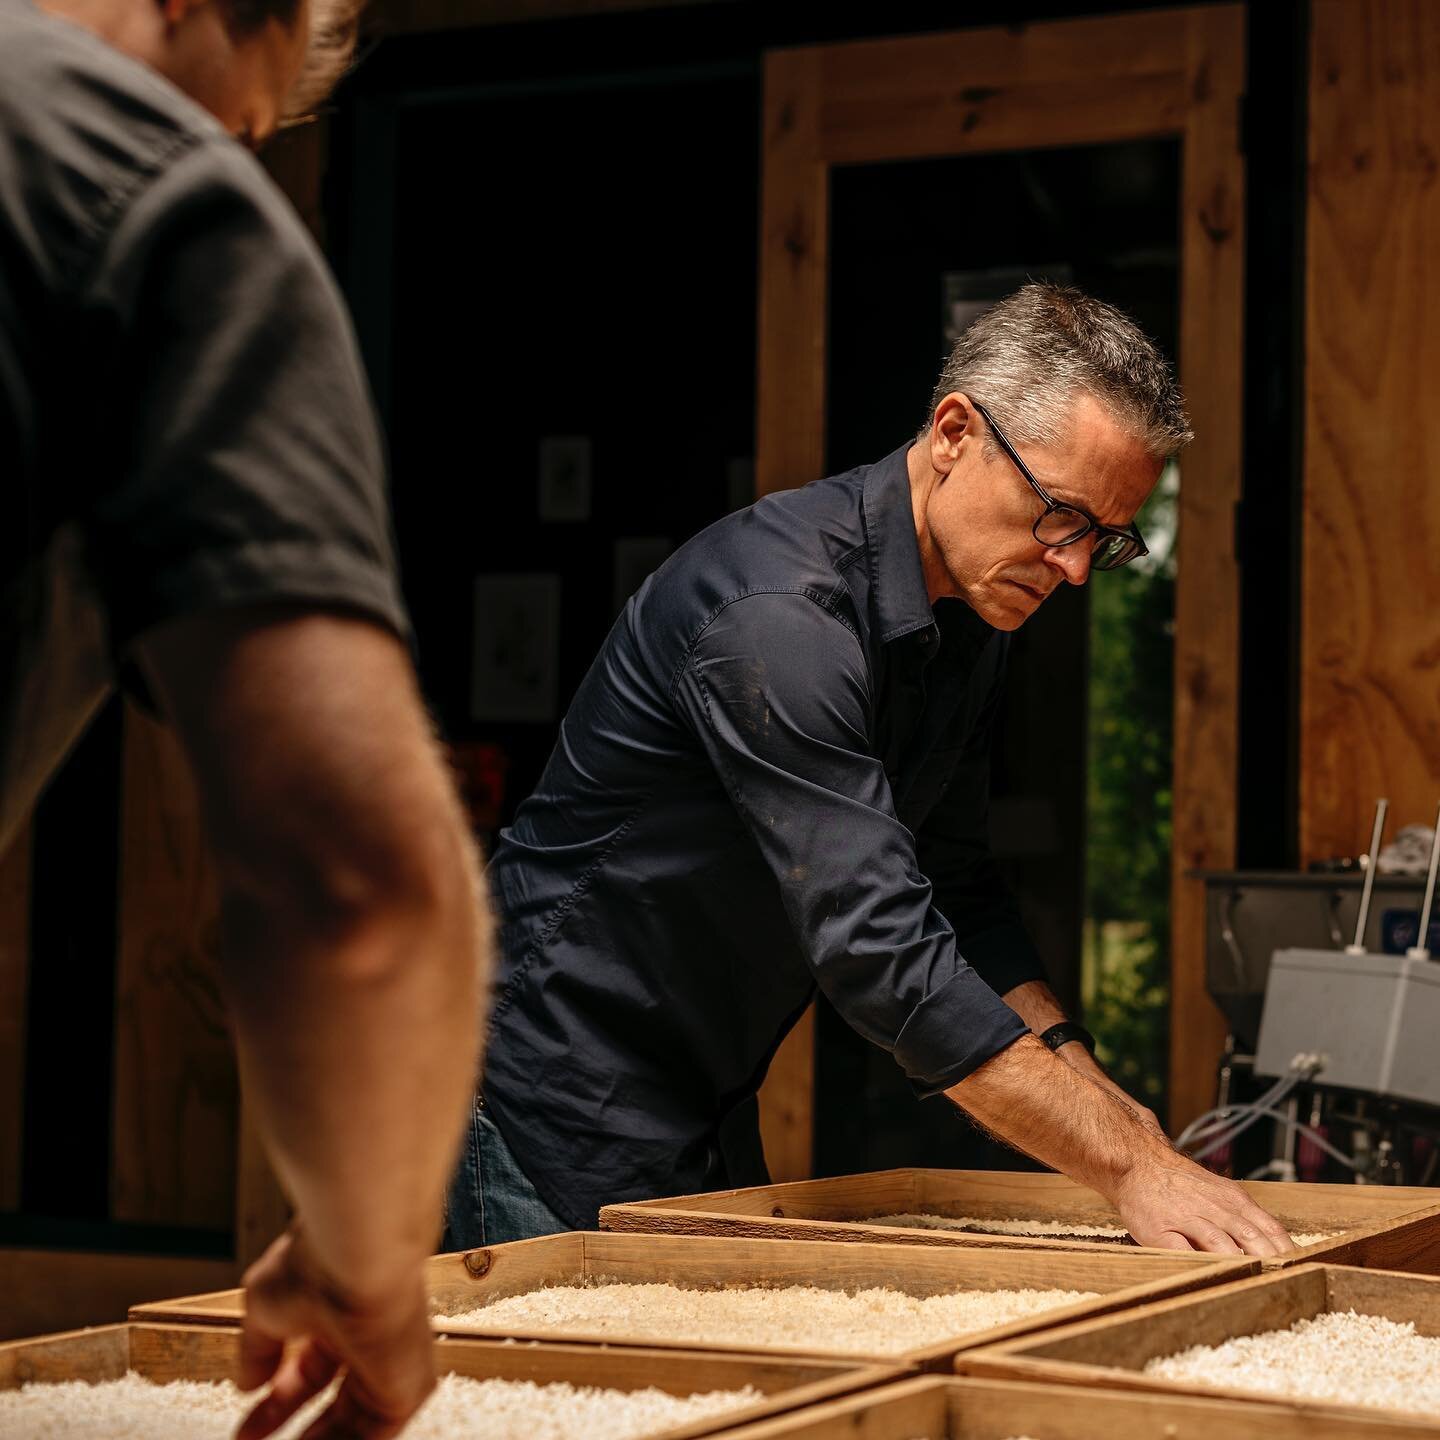 The process for creating the base spirit of our gin borrows from Japanese sake making. We methodically ferment Mississippi Delta rice and grow our koji in-house. The resulting spirit creates a beautifully clean foundation for layering each of our ind